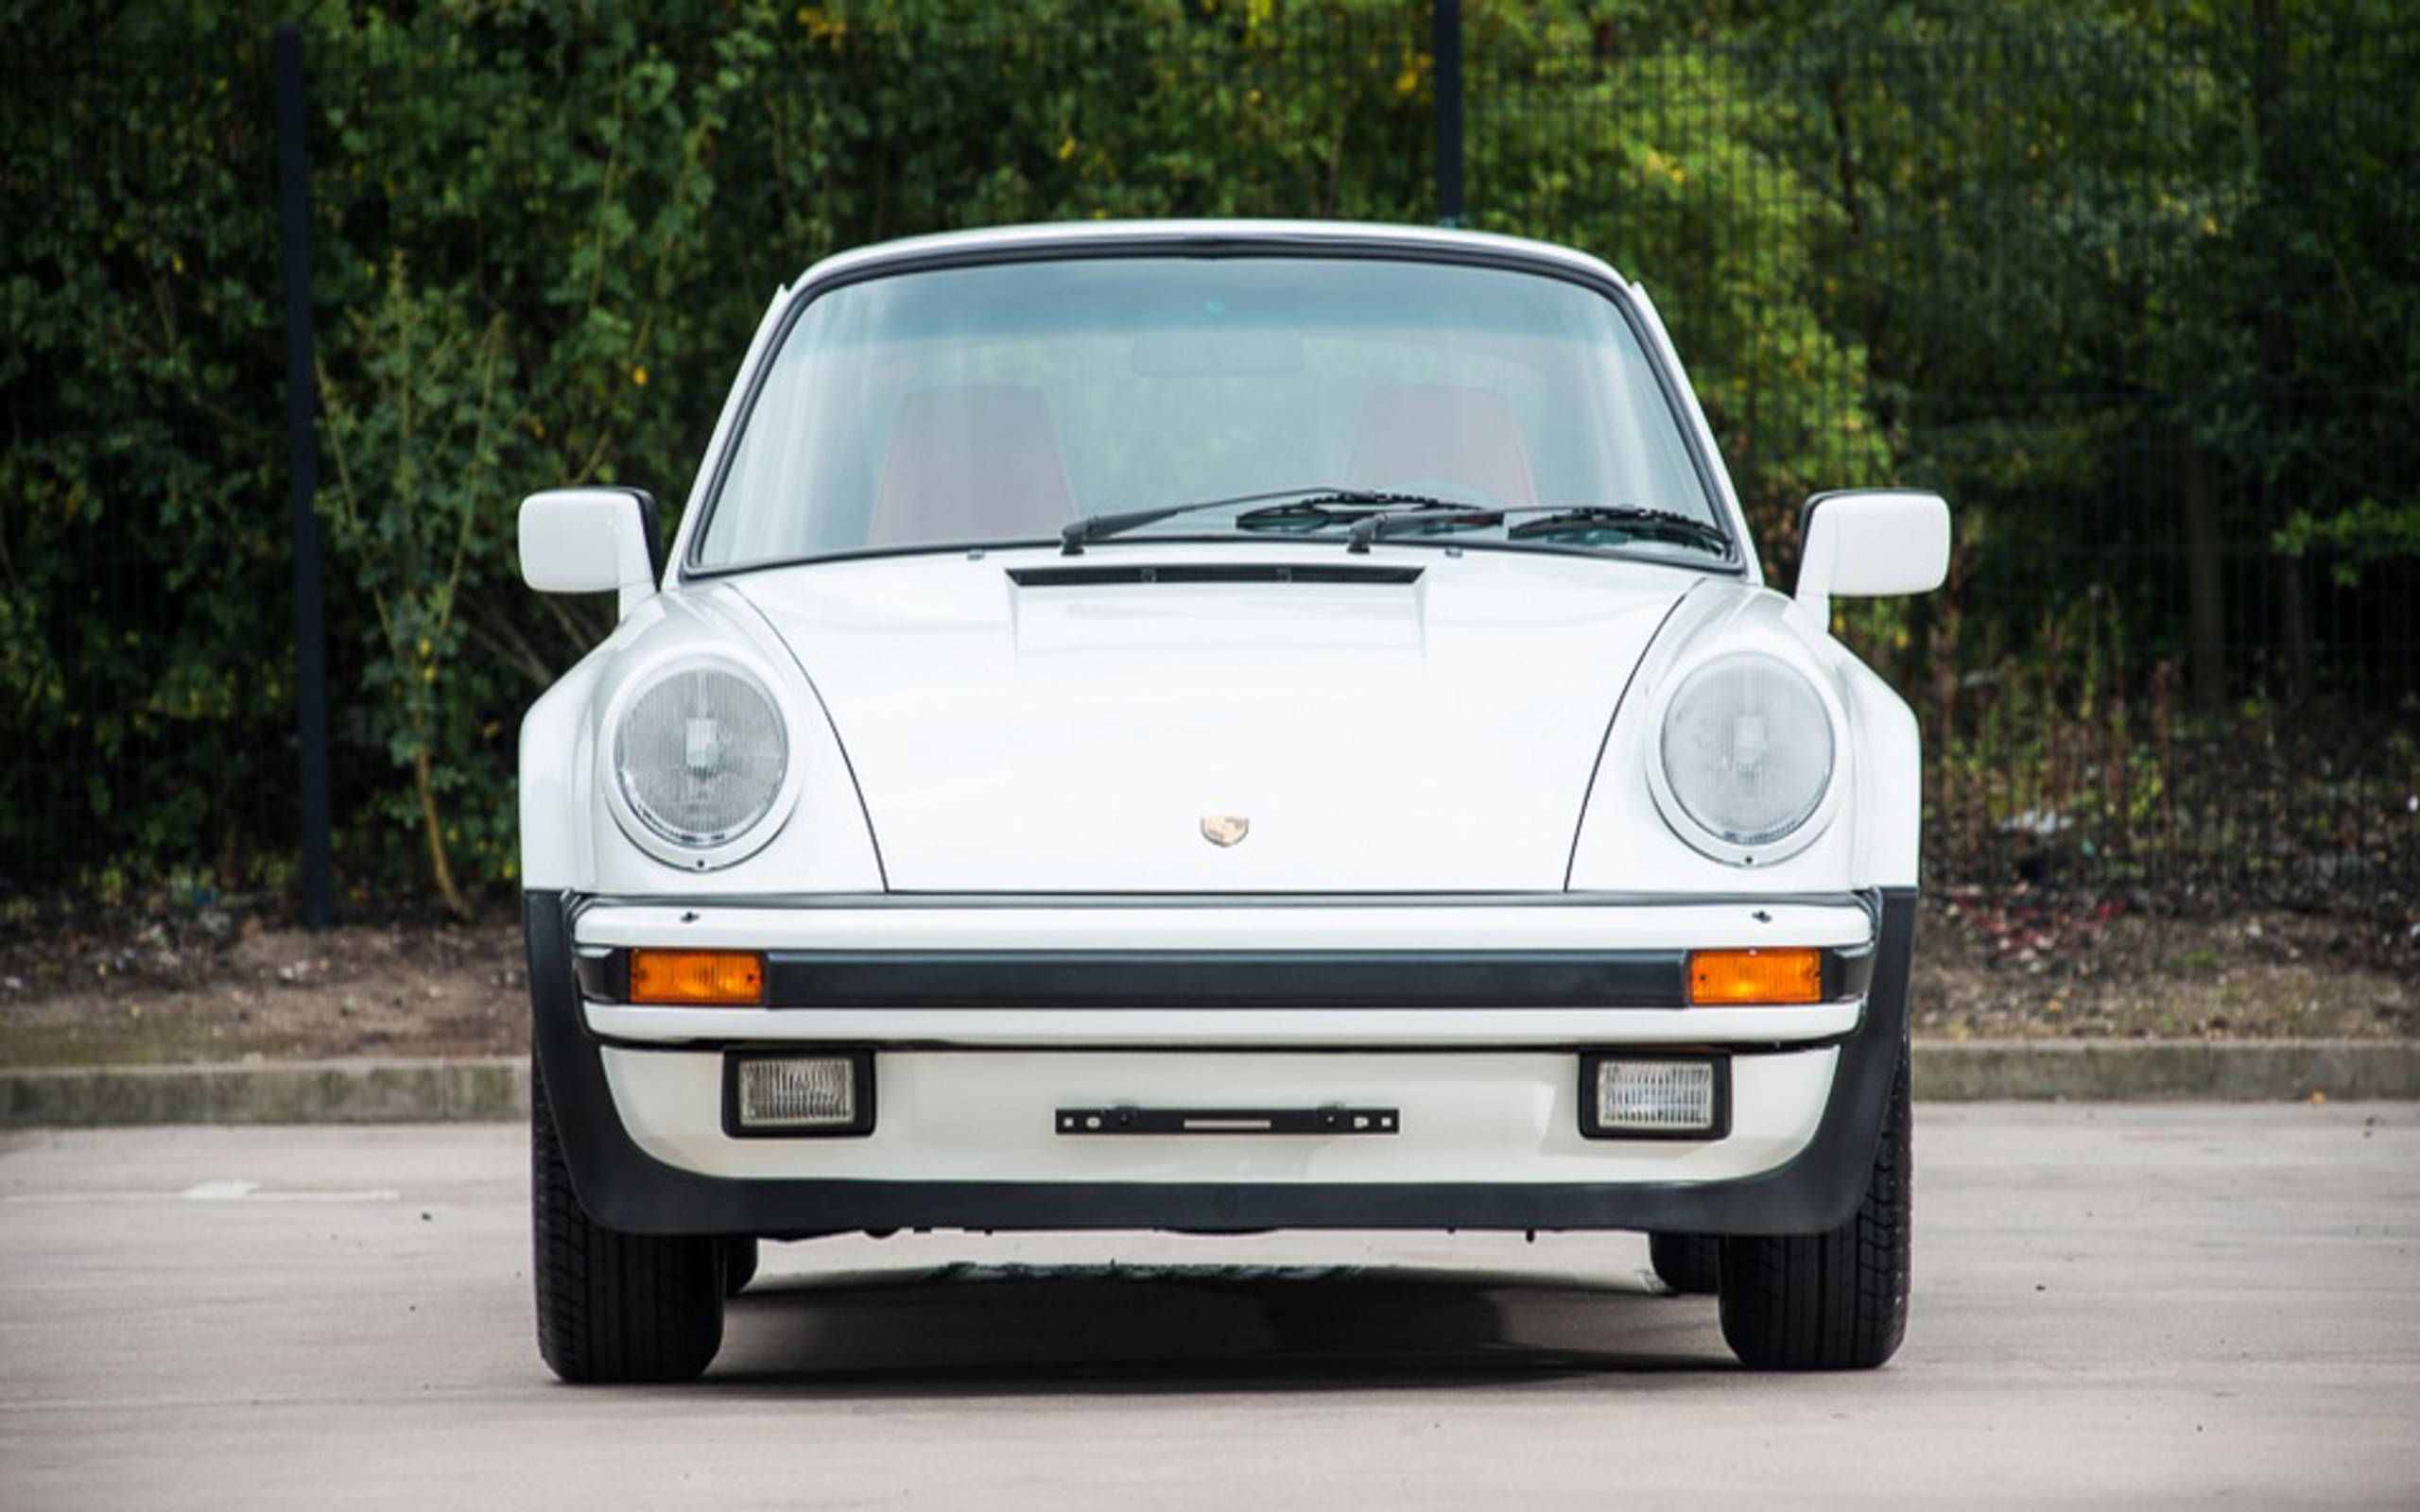 Turns out you can buy a 'new' 1986 Porsche 911